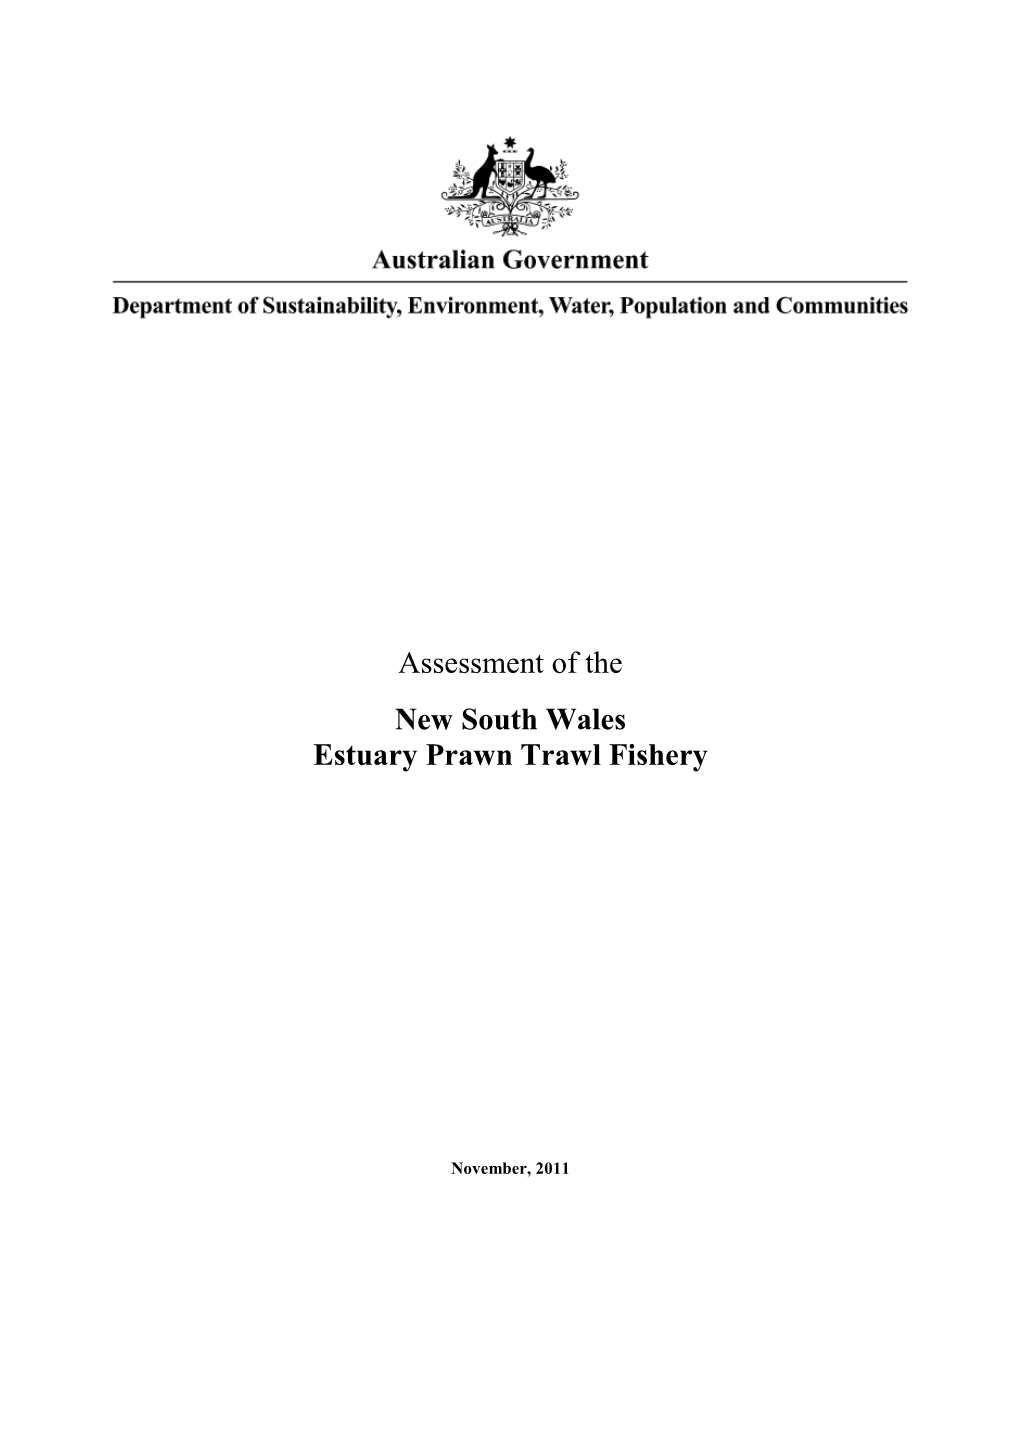 Assessment of the New South Wales Estuary Prawn Trawl Fishery